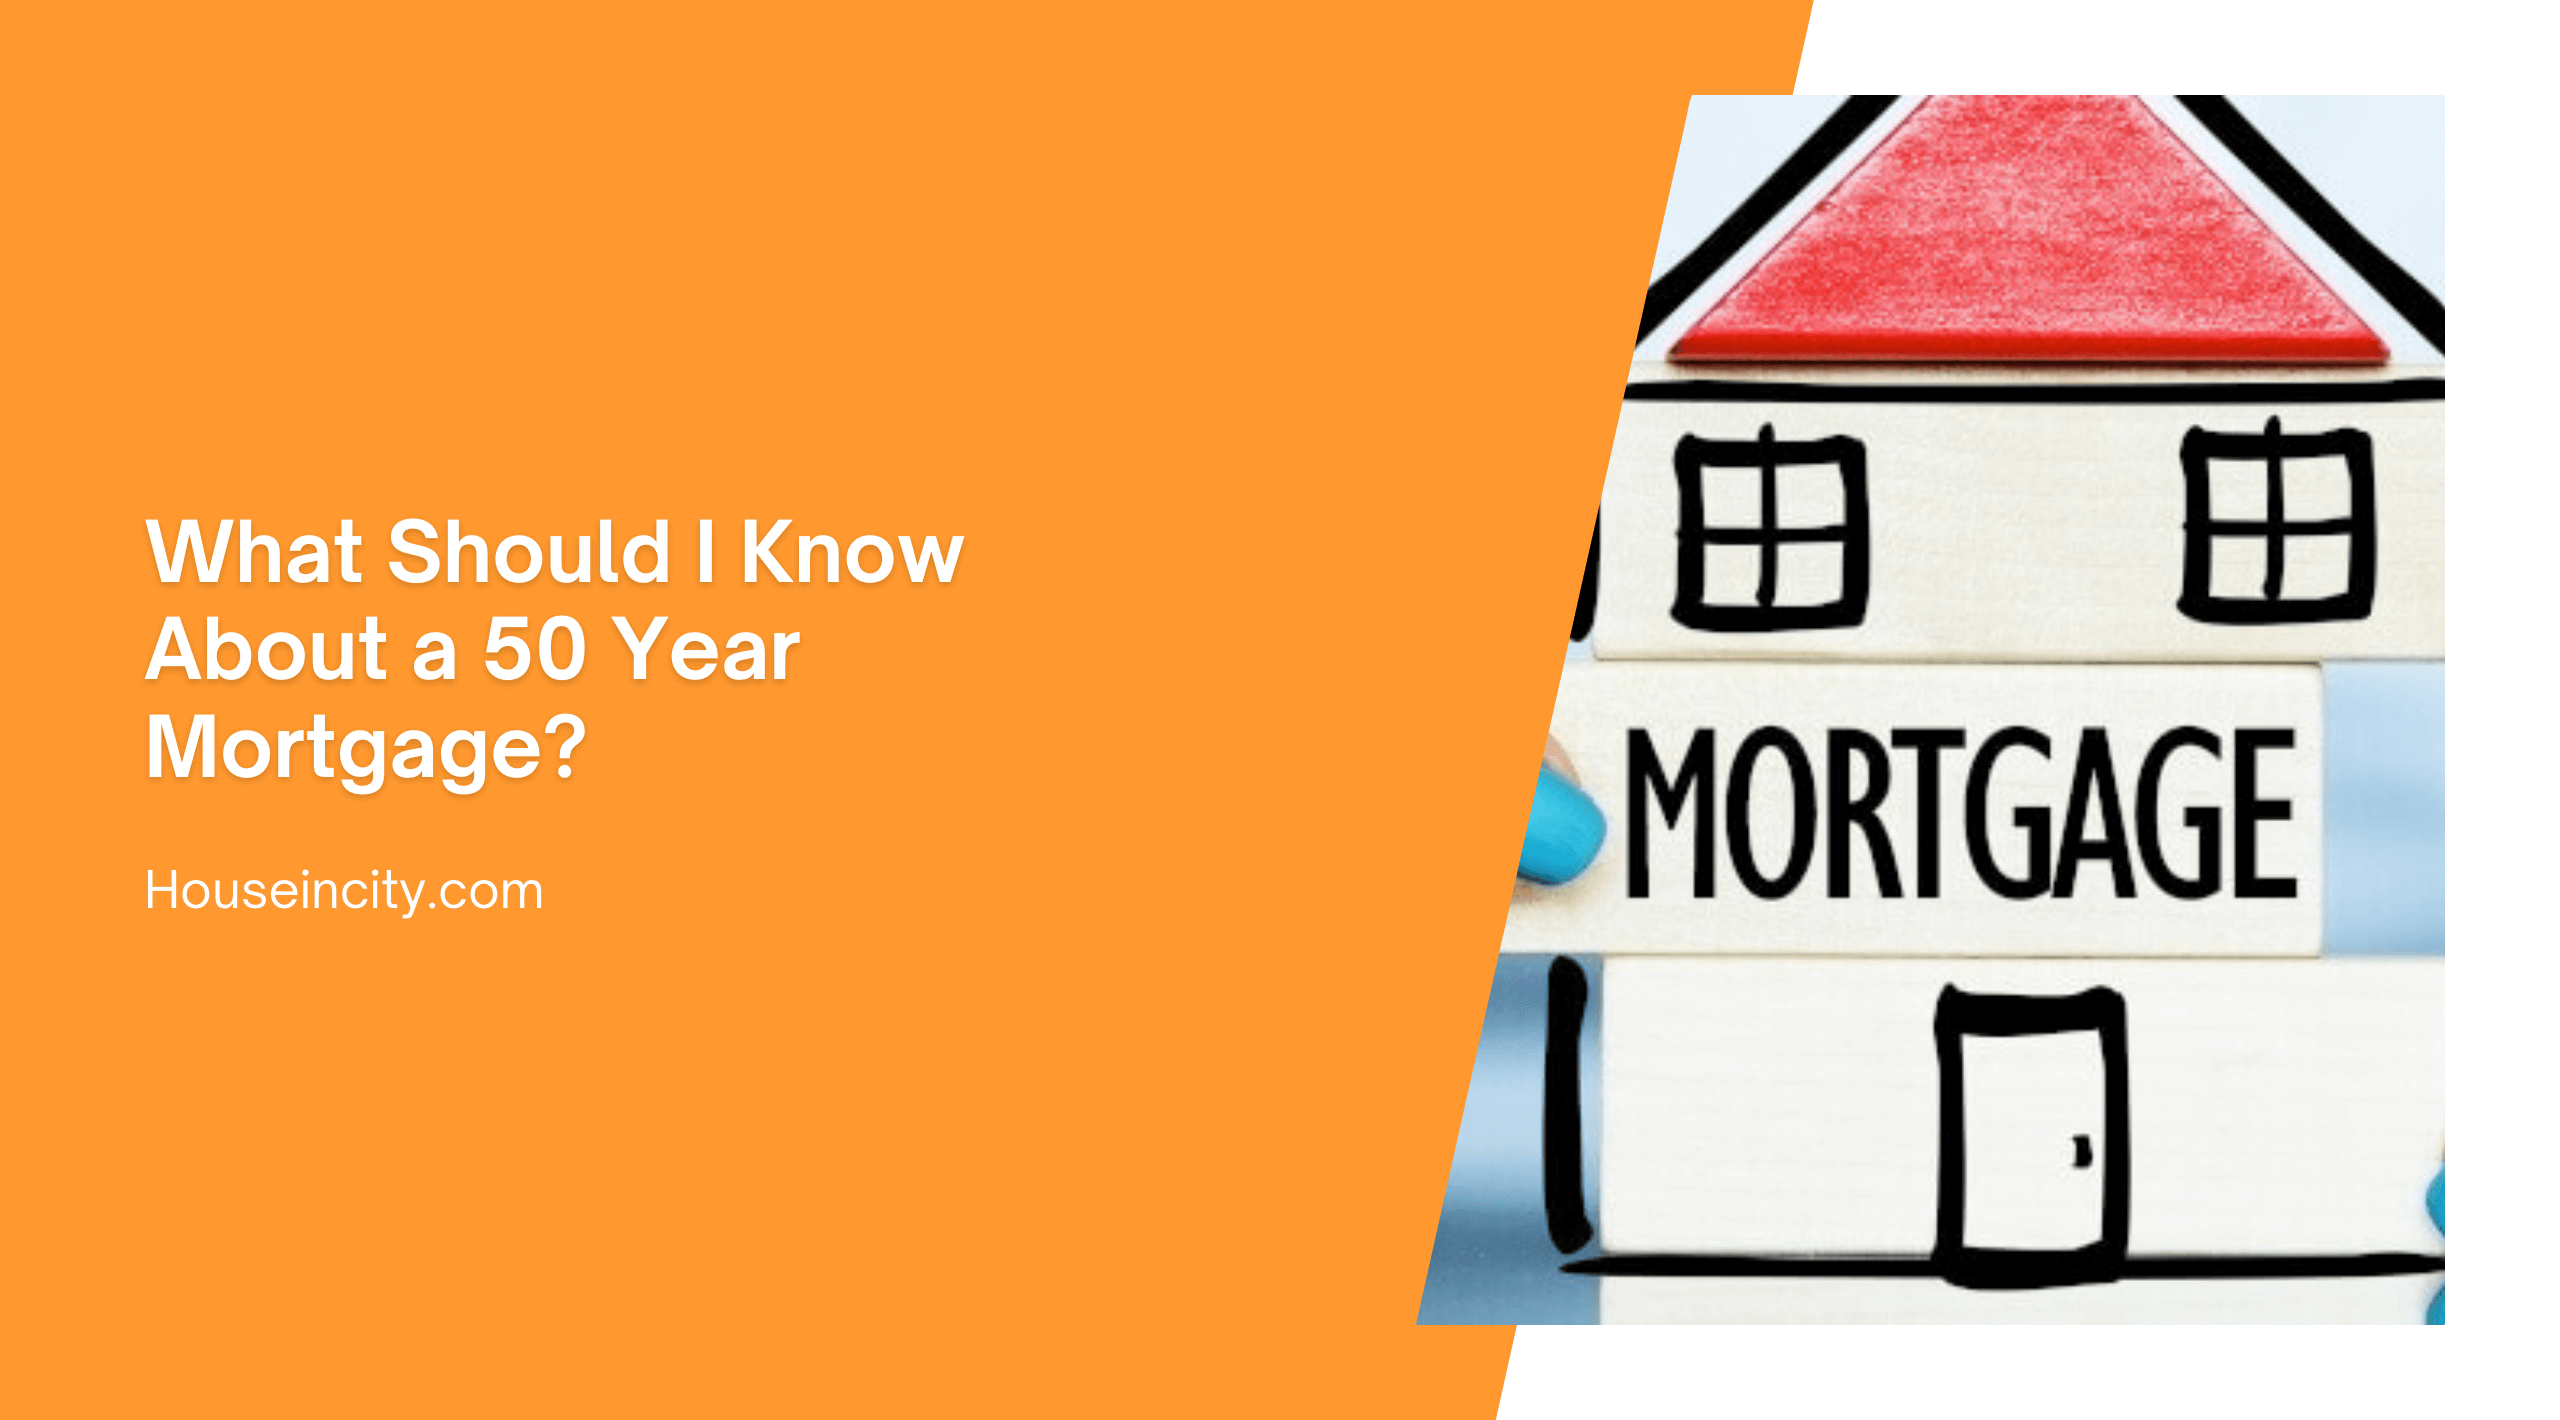 What Should I Know About a 50 Year Mortgage?